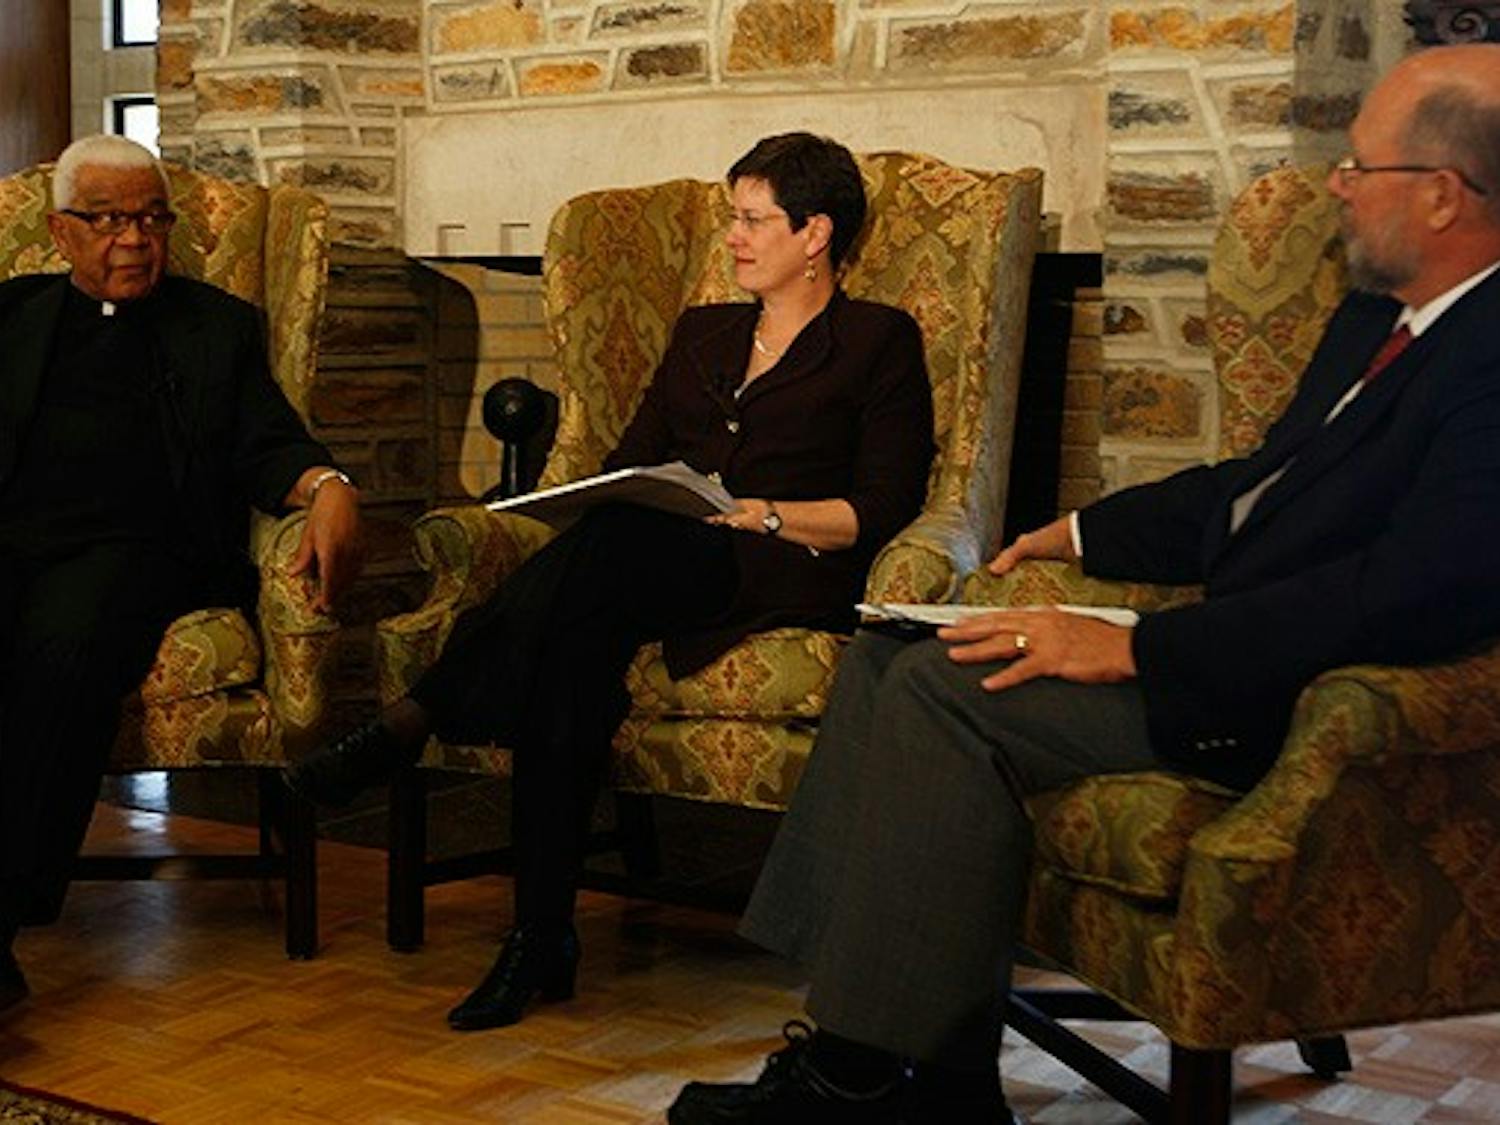 uthor John Allen (right) and professor Karin Shaprio (middle) interview Archbishop Walter Paul Khotso Makhulu in the Divinity School Friday afternoon.